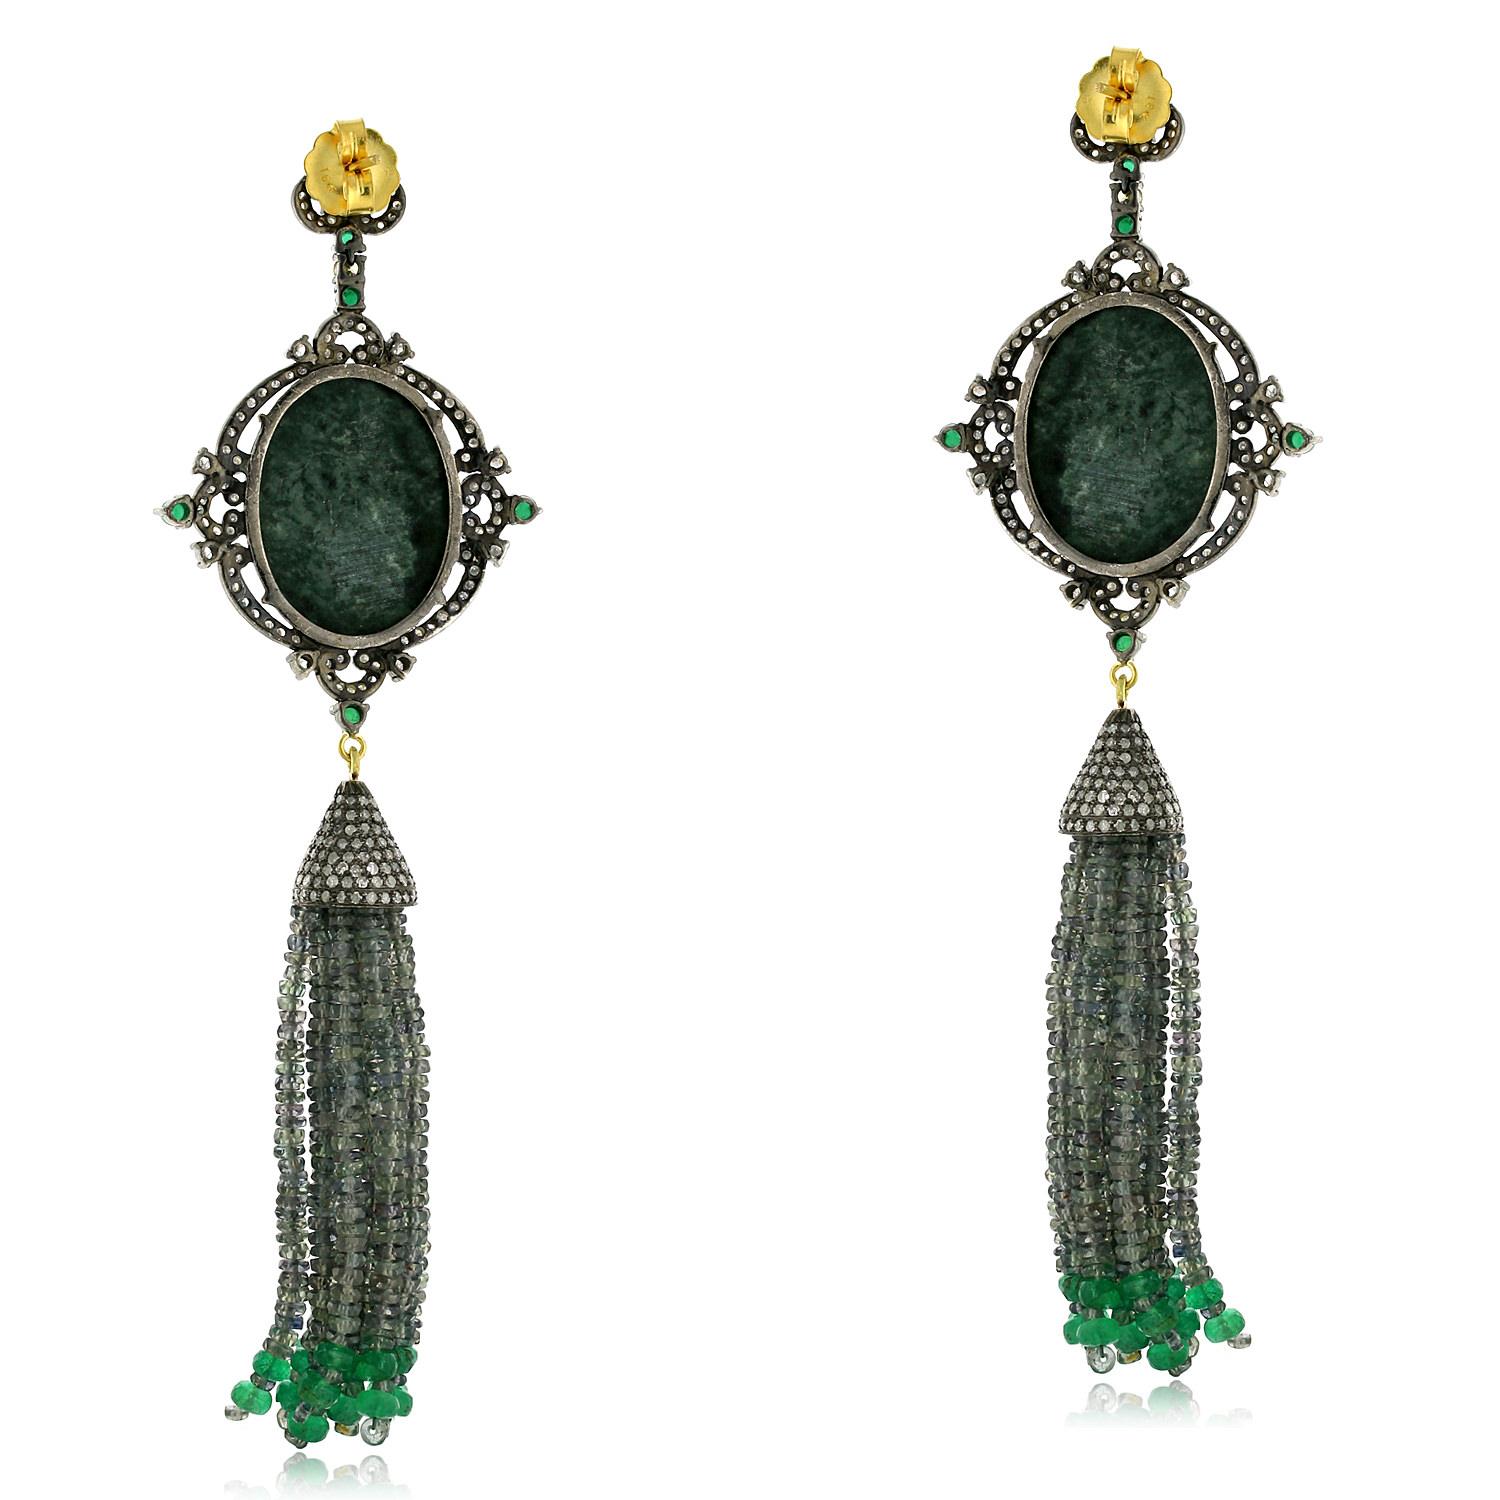 Designer Vintage looking Cameo Tassel Earring with Diamond and Sapphires in Gold and silver. The cameo is hand carved out of lava stone which makes this earring one of a kind.

18kt gold:1.88gms
Diamond:4.34cts
Cameo:35.15cts
